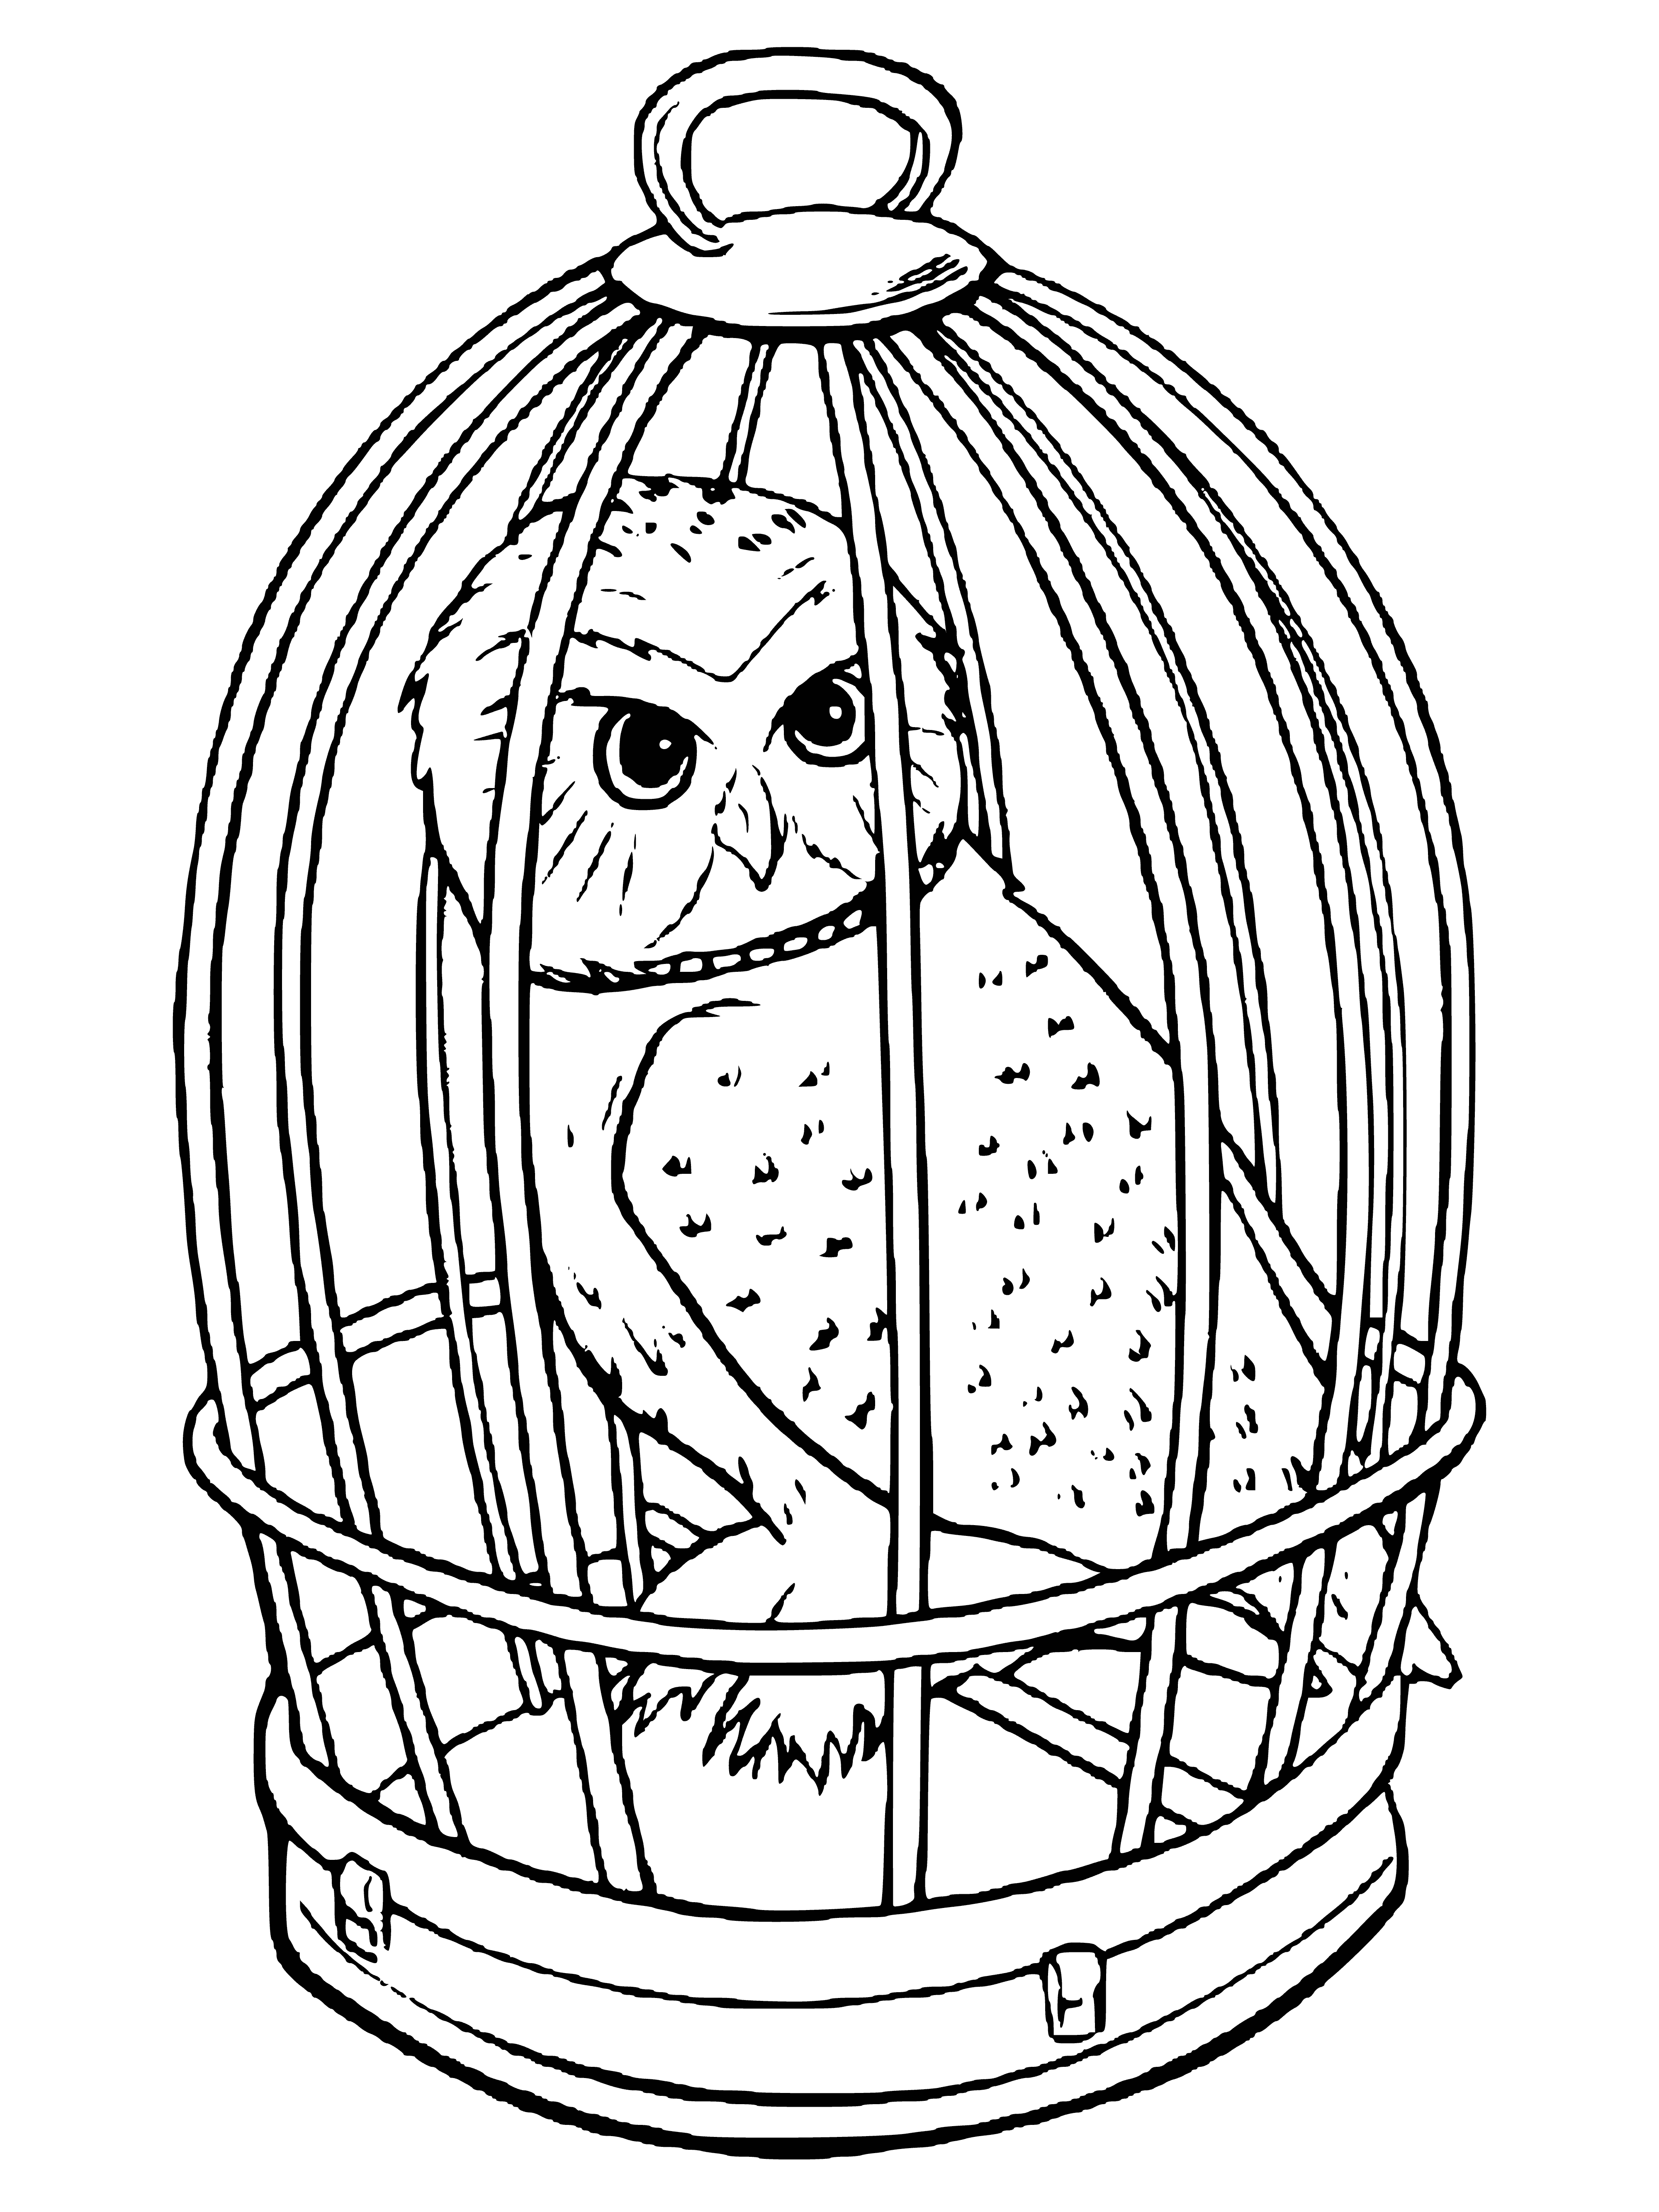 Owl in a cage coloring page